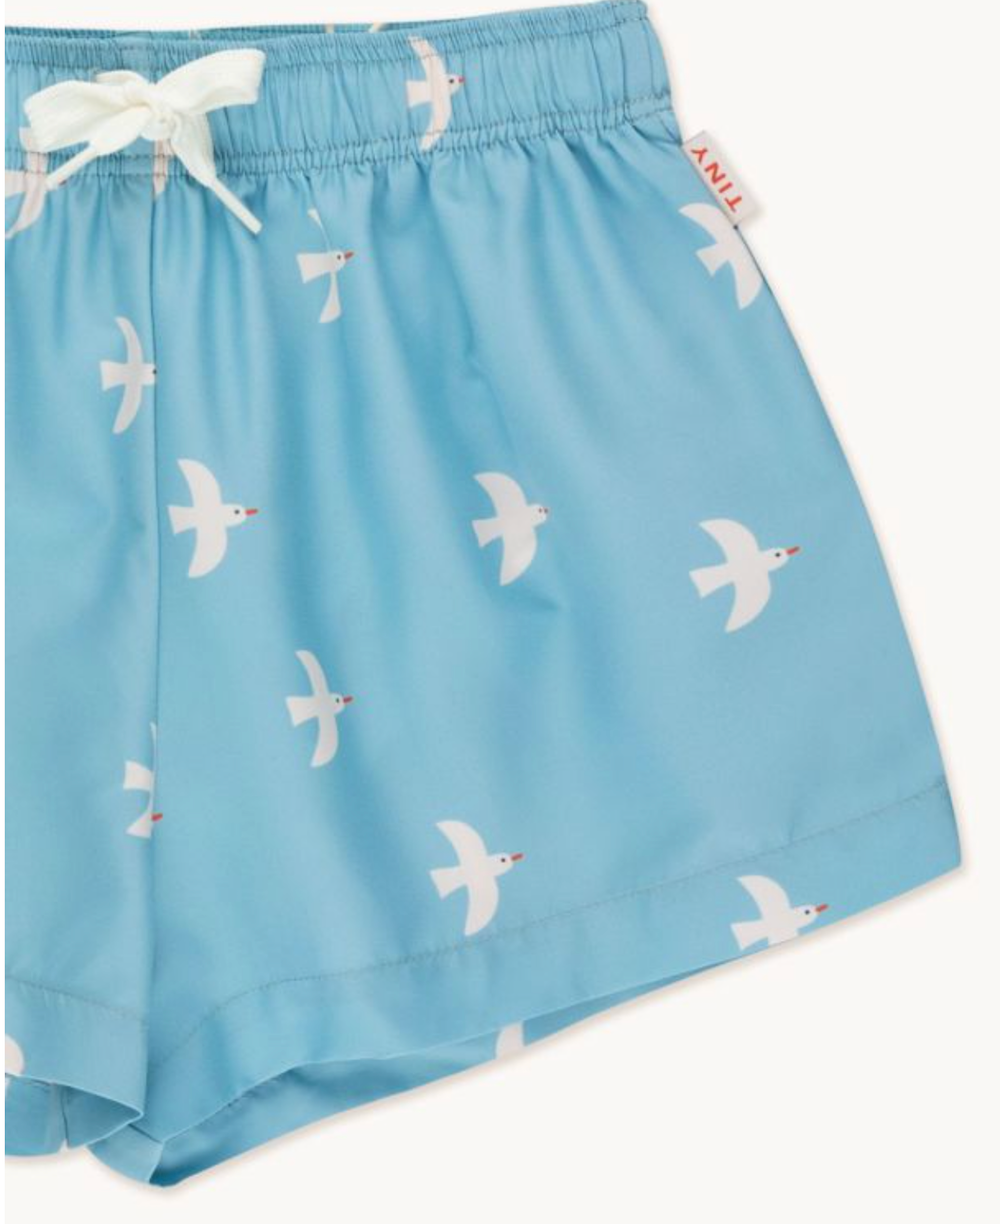 Tiny Cottons Birds Trunk - Washed Blue / Light Cream